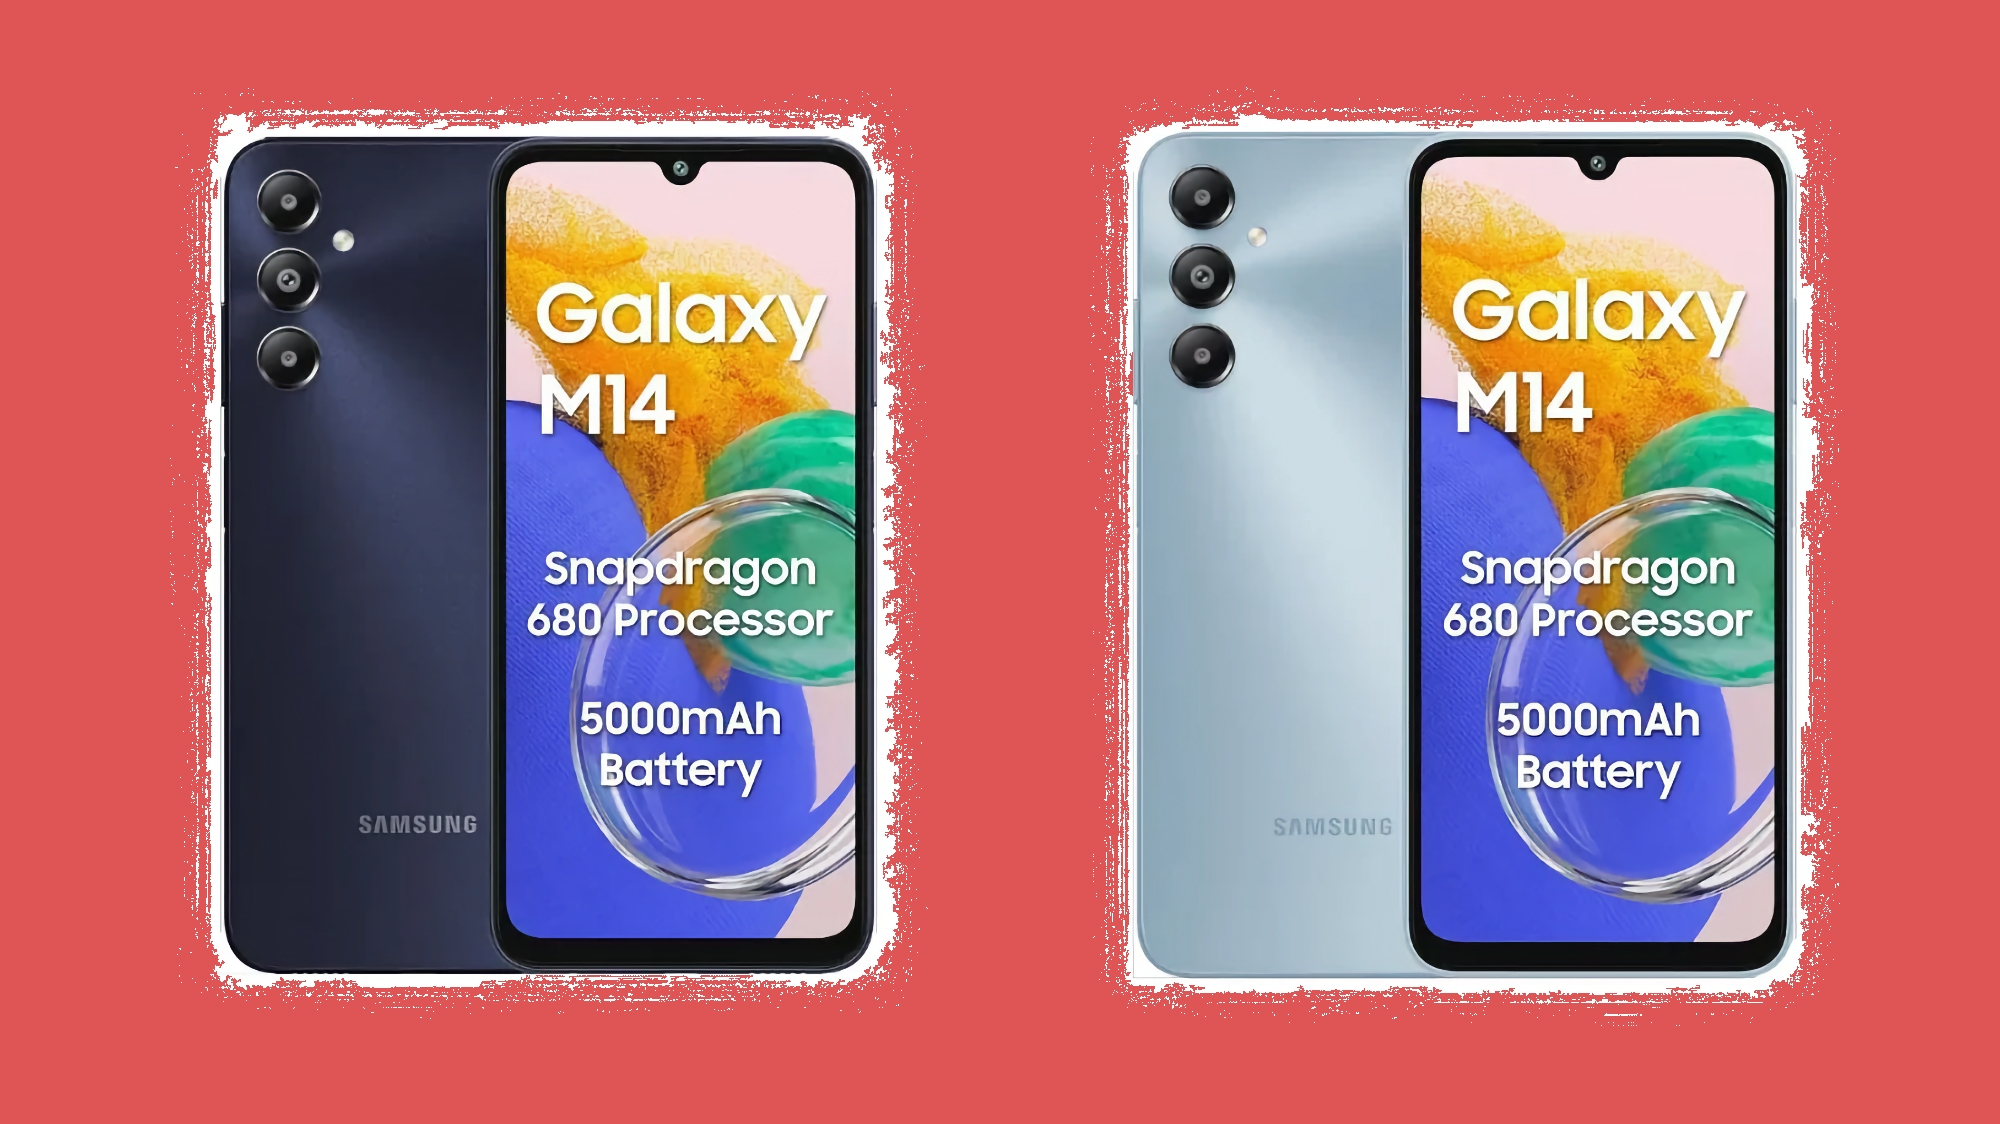 Samsung Galaxy M14 4G: Snapdragon 680 chip and 5000 mAh battery for $105